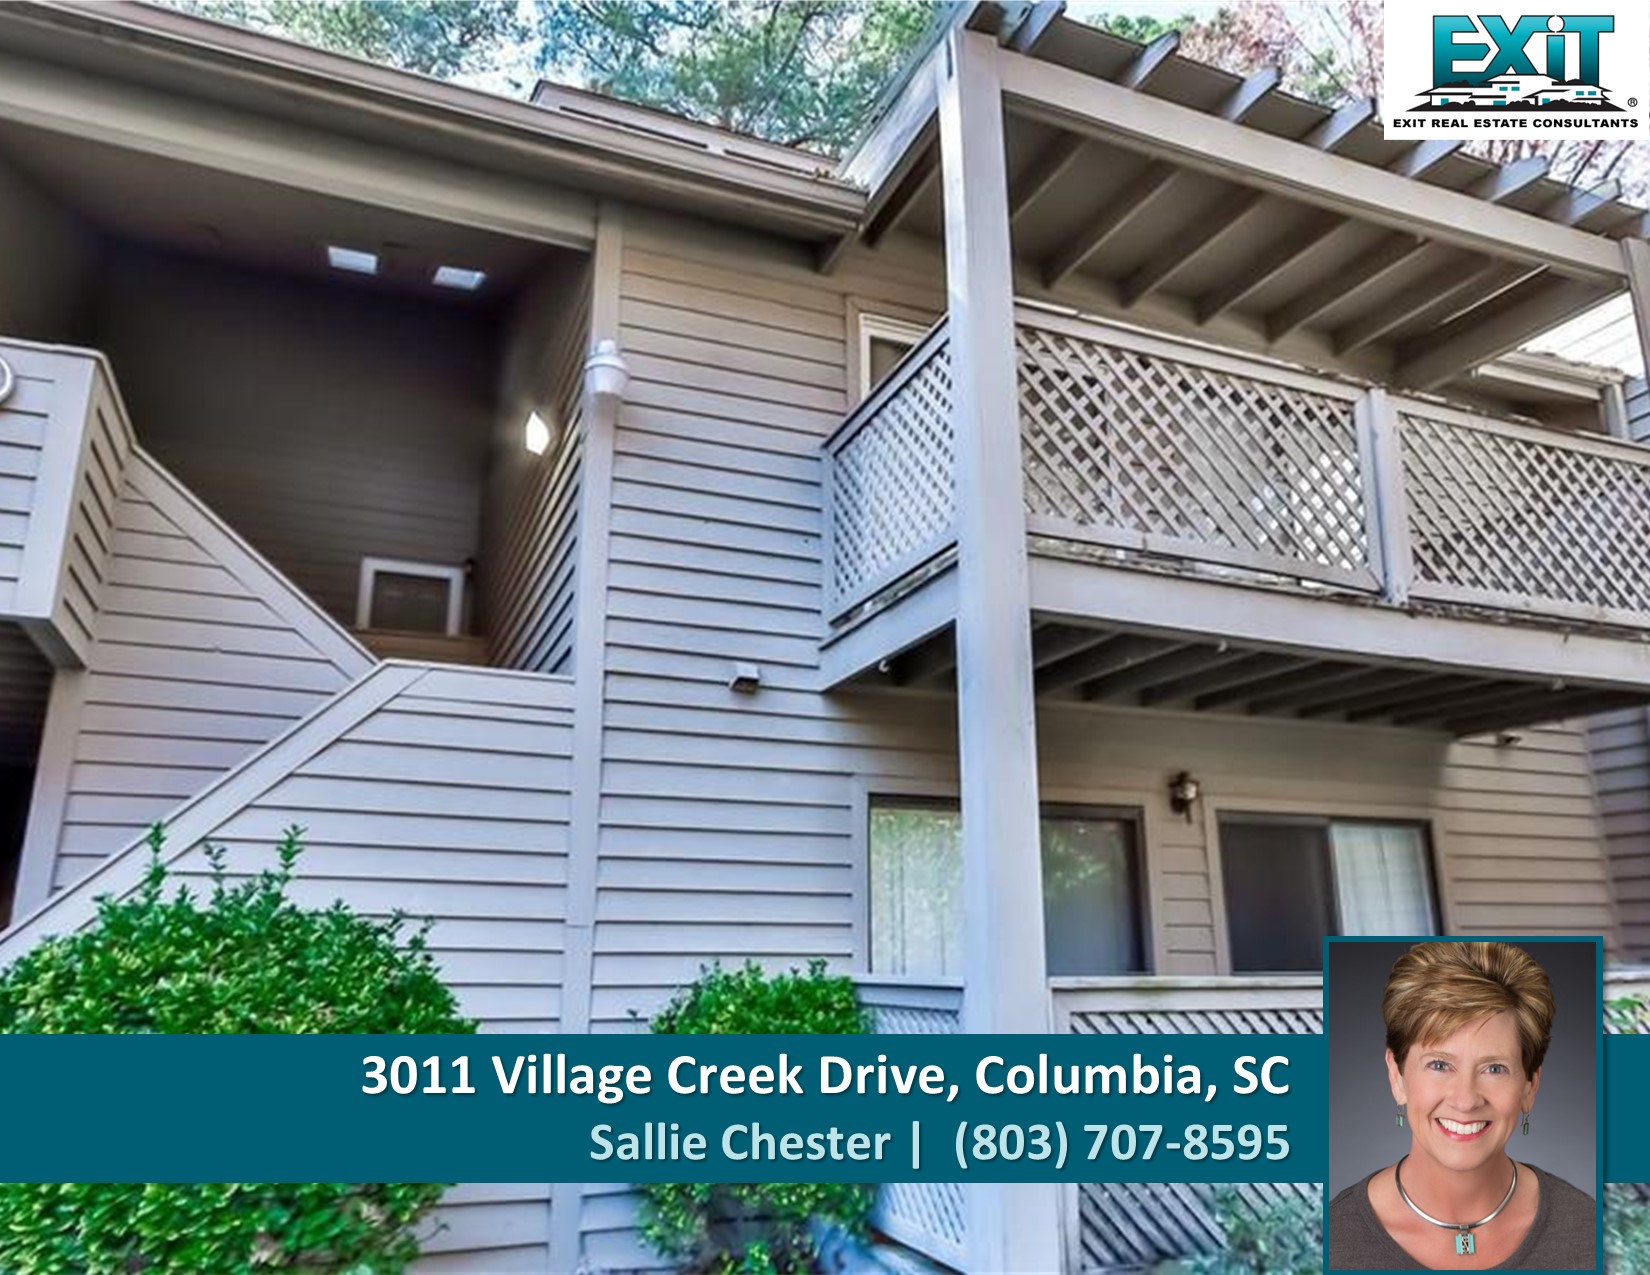 Just listed in Village Creek